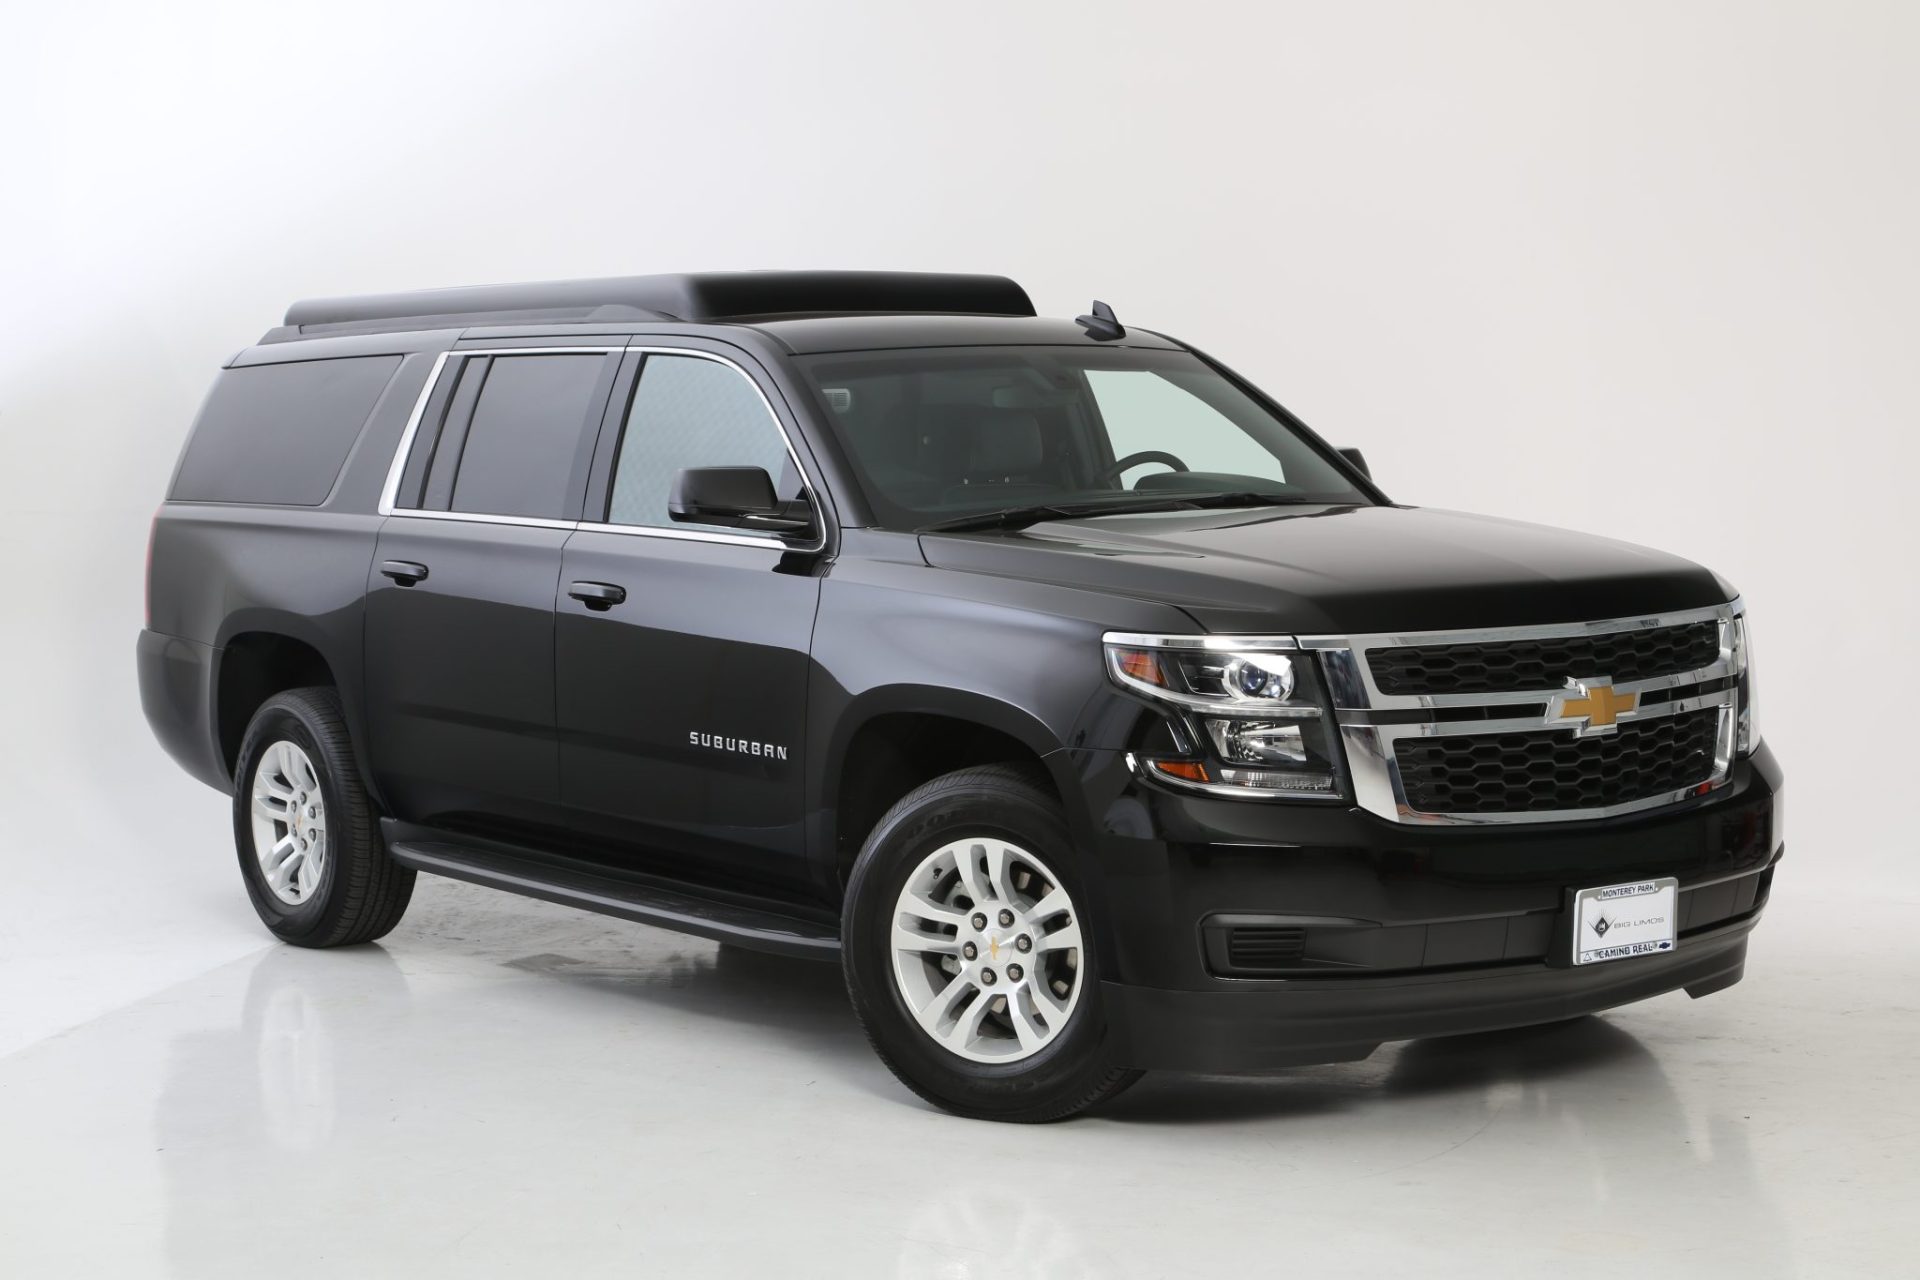 Chevy Suburban CEO Mobile Office